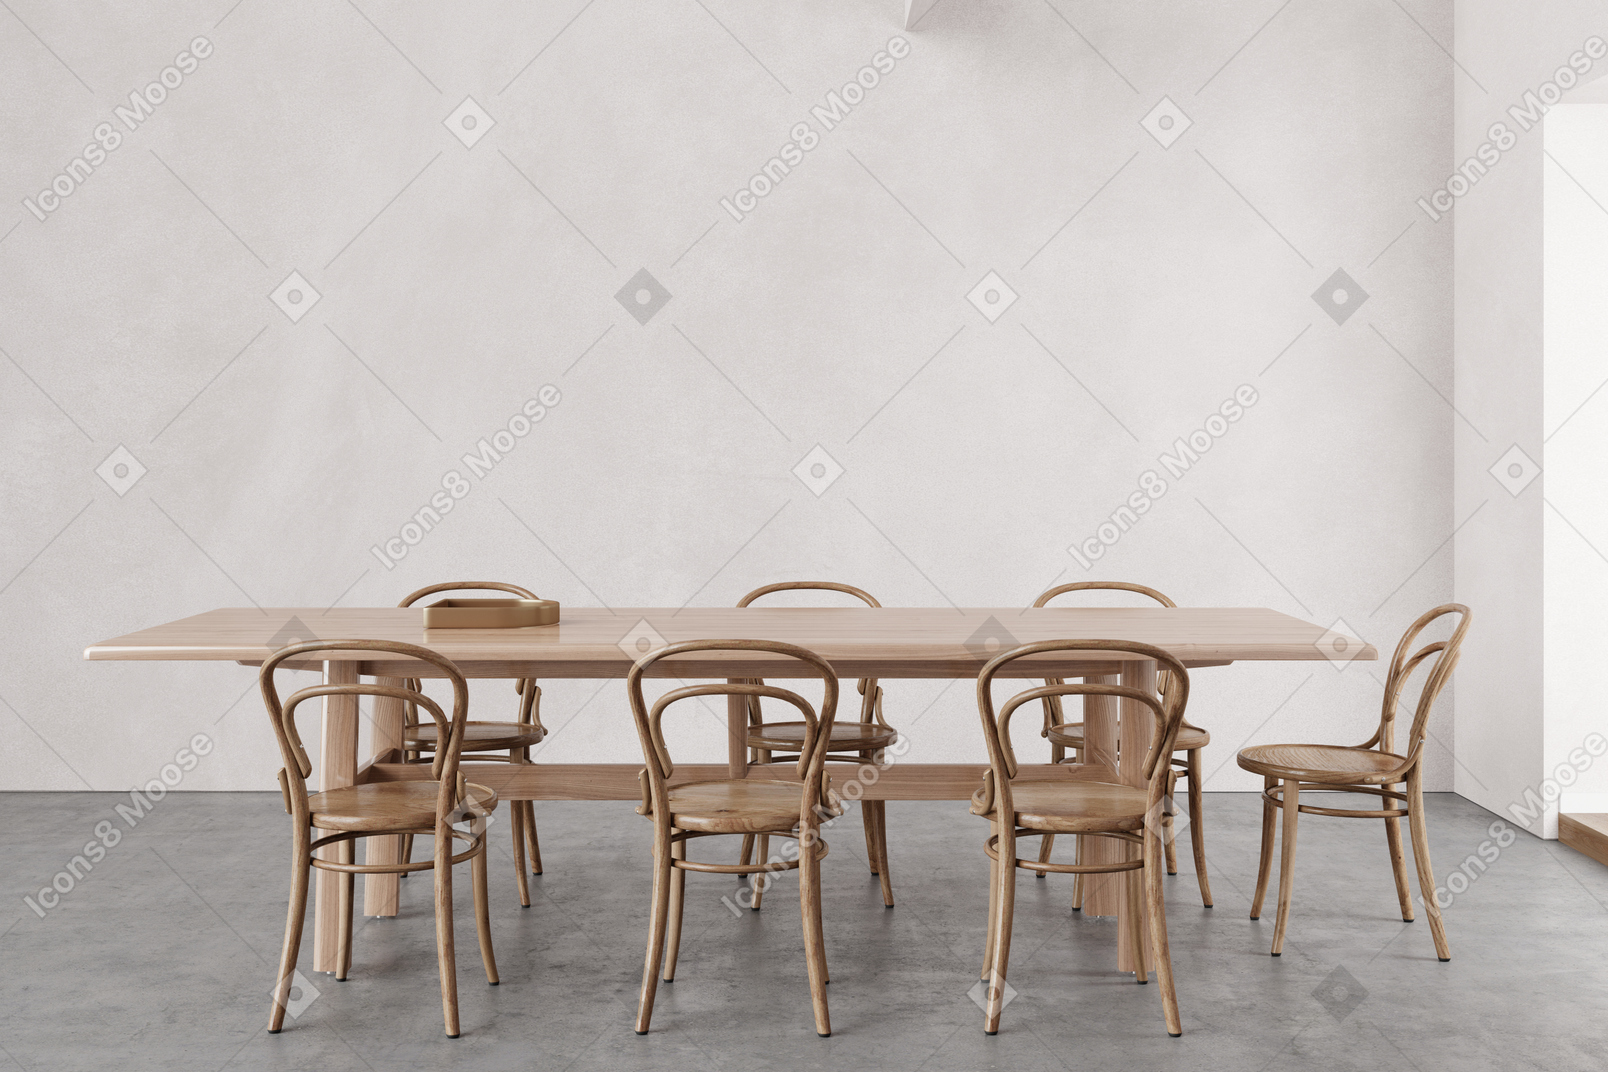 Background of wooden table and chairs in the room